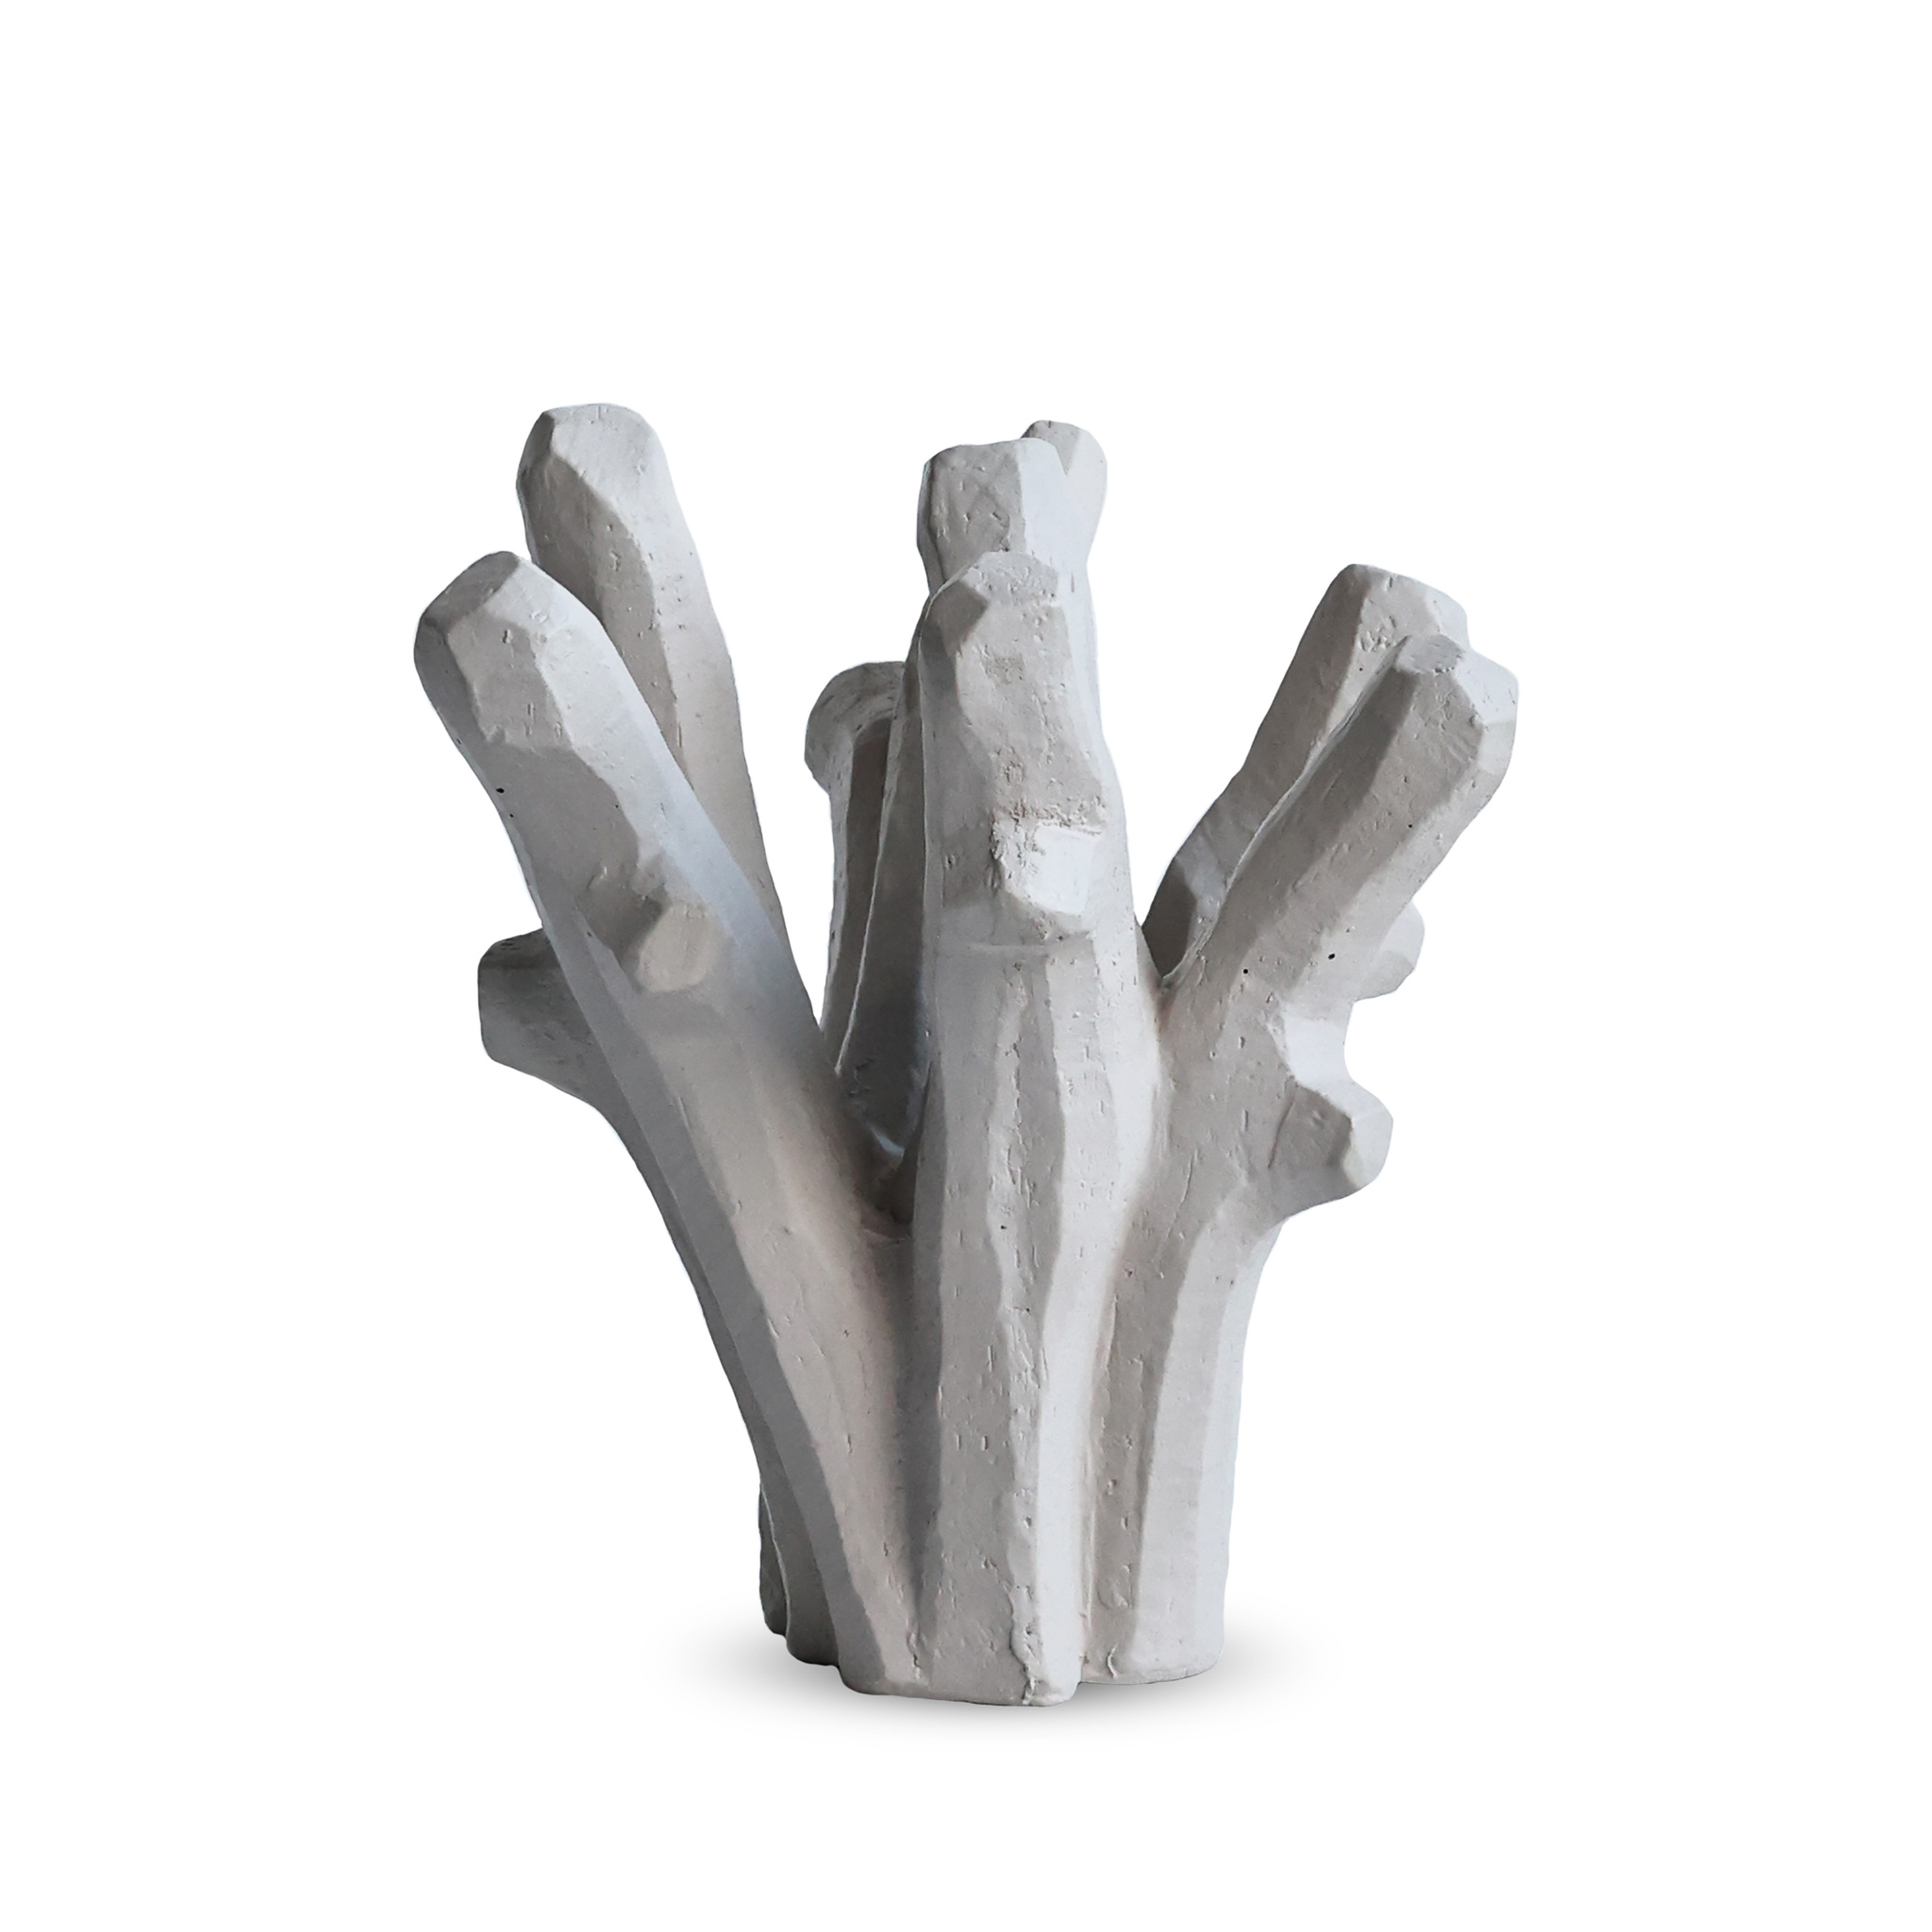 COOEE // SCULPTURE THE CORAL TREE |KOHLE